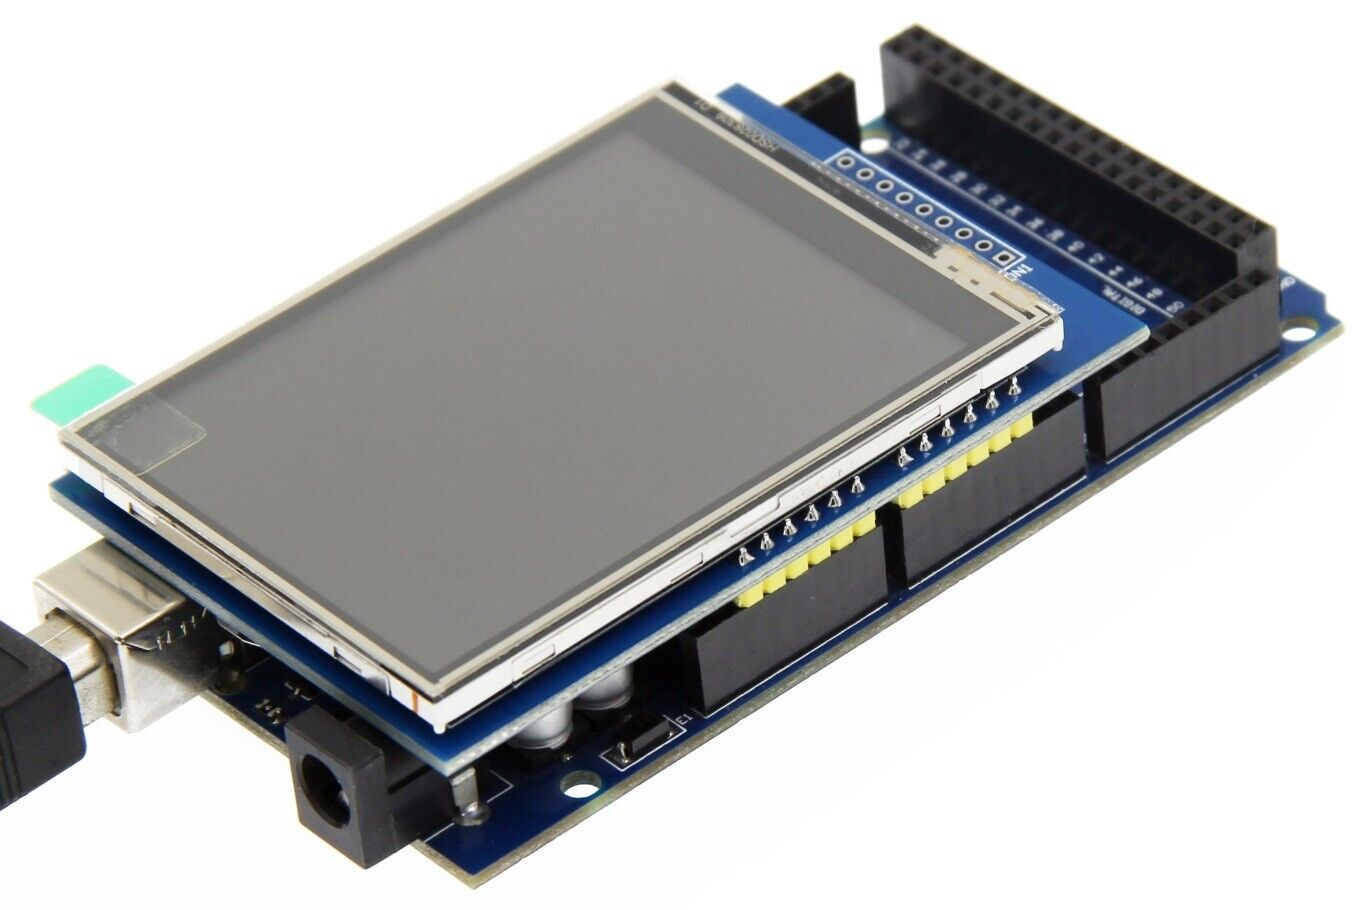 2.8 TFT LCD Display Full Color Touch Screen Shield for Arduino UNO MEGA SD Card